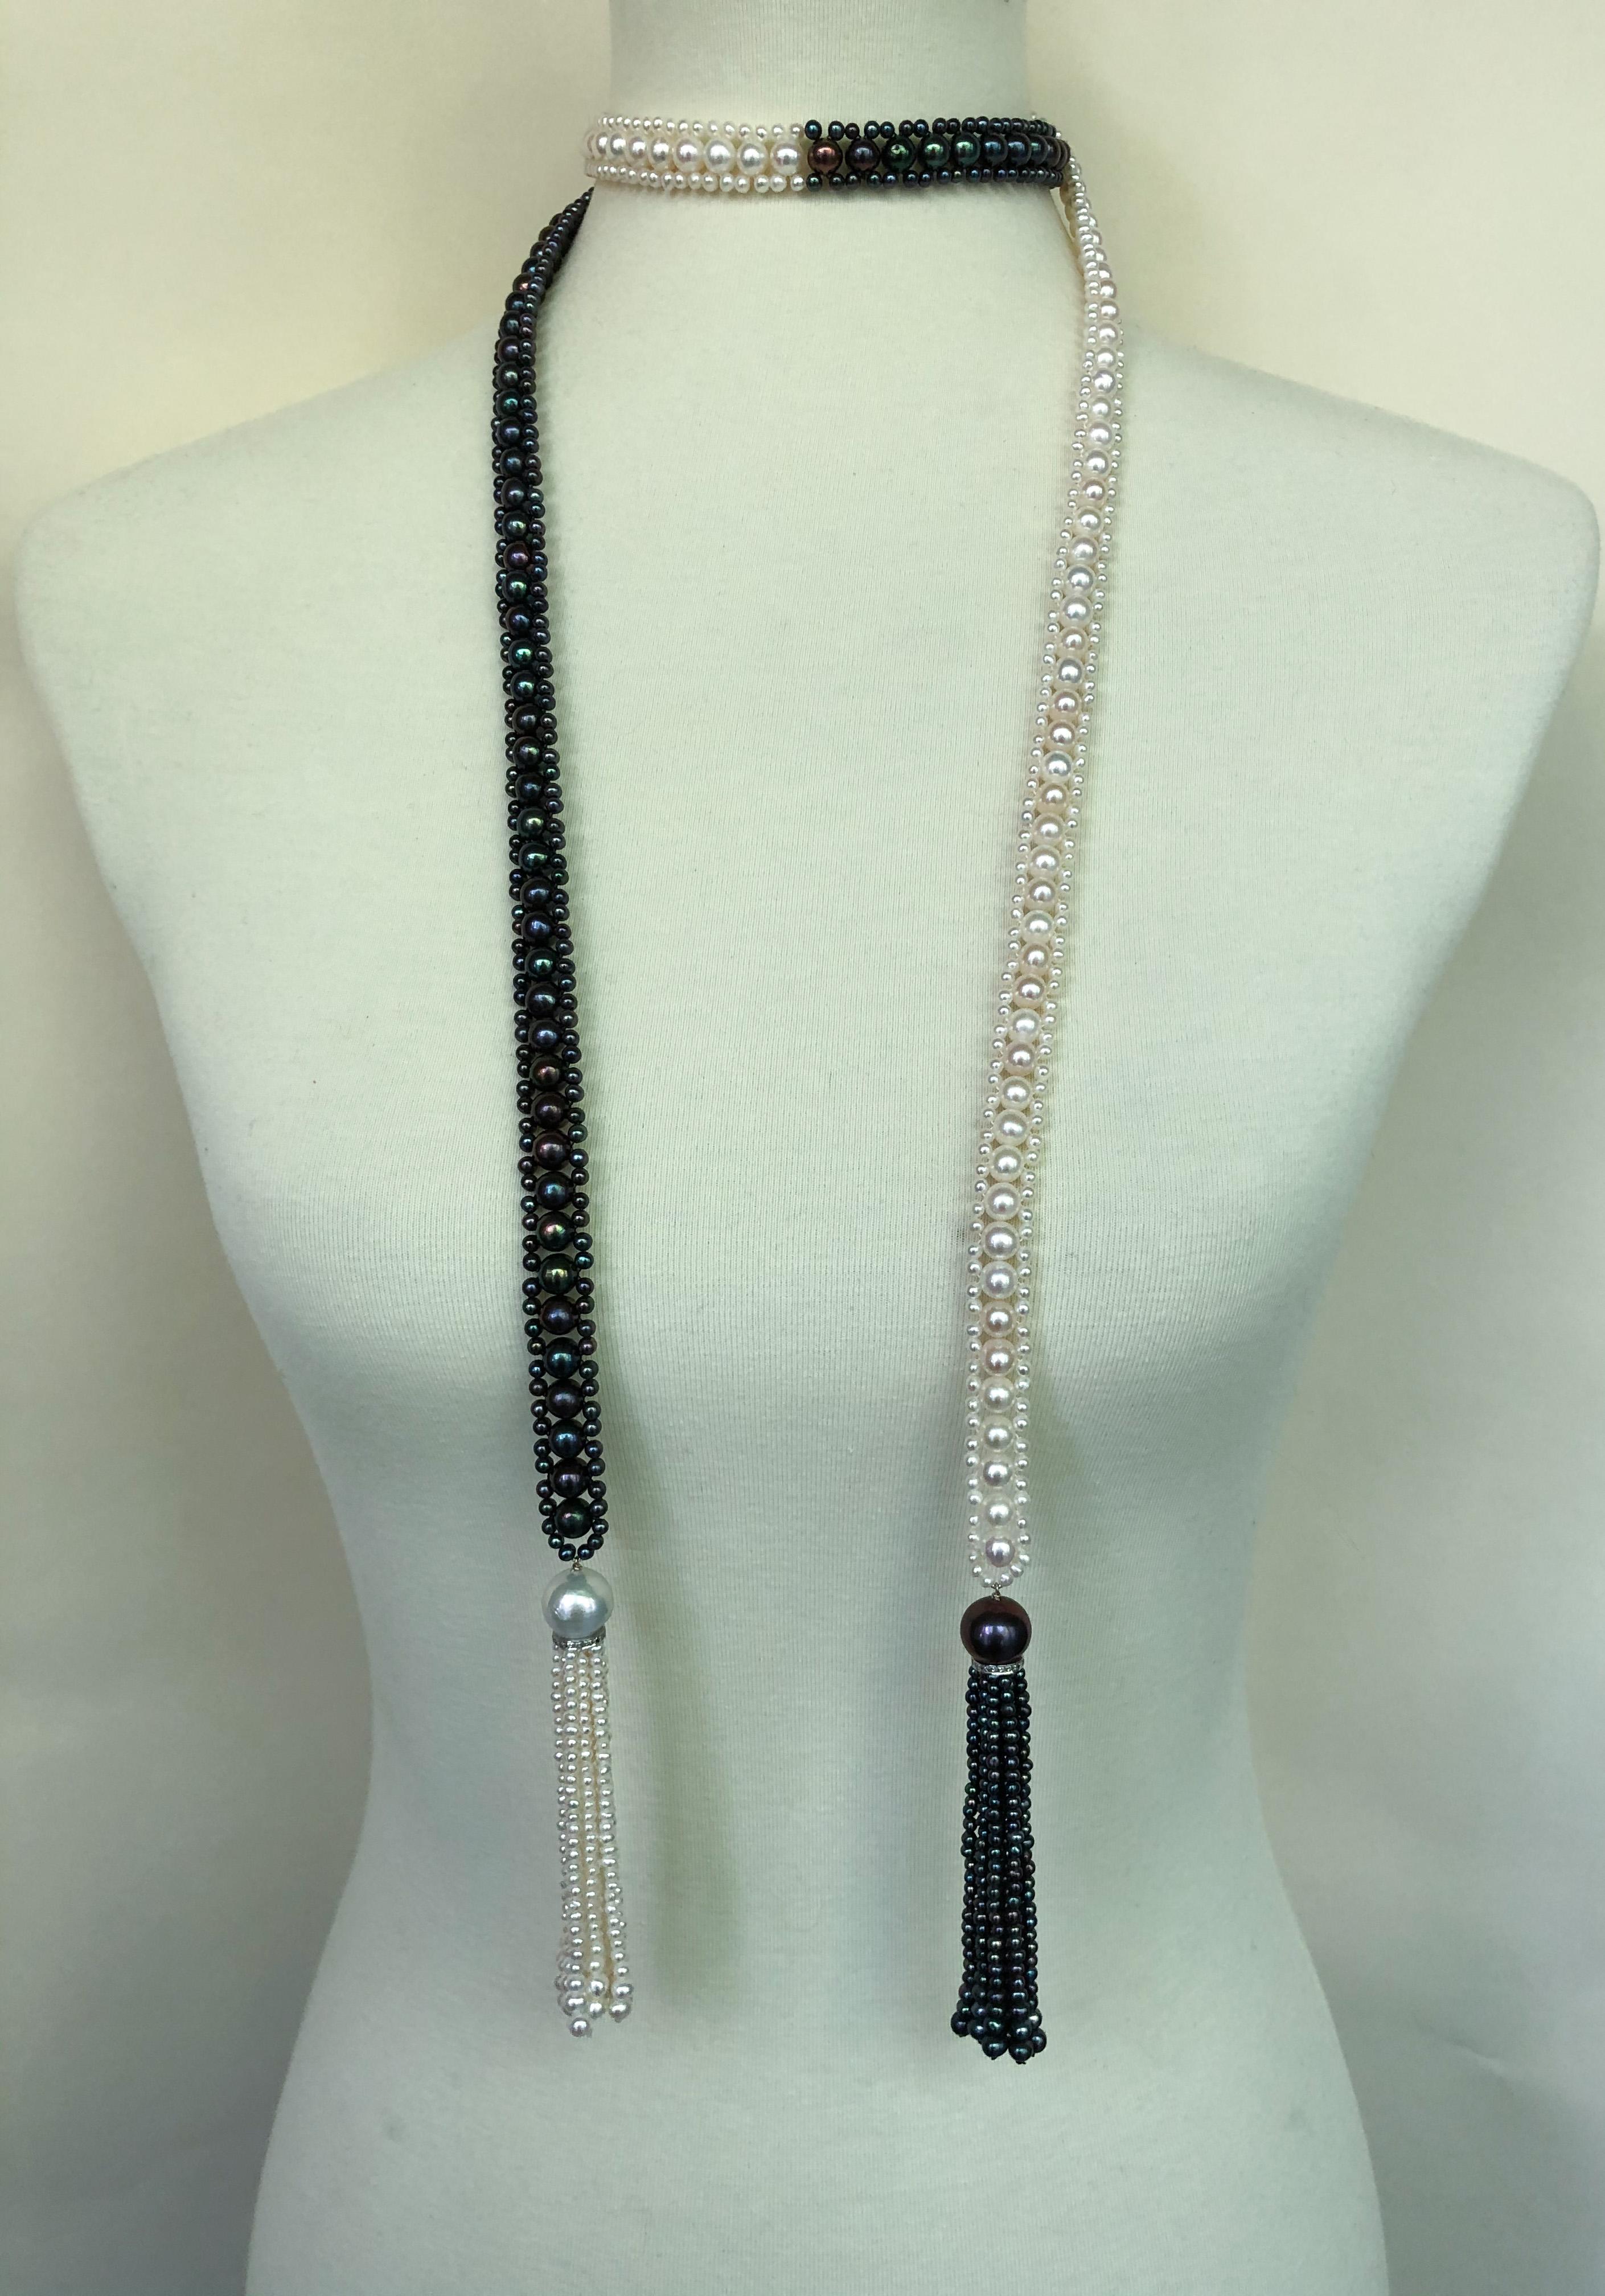 Brilliant Cut Marina J. Long Woven Black and White Pearl Sautoir Necklace in Art Deco Style